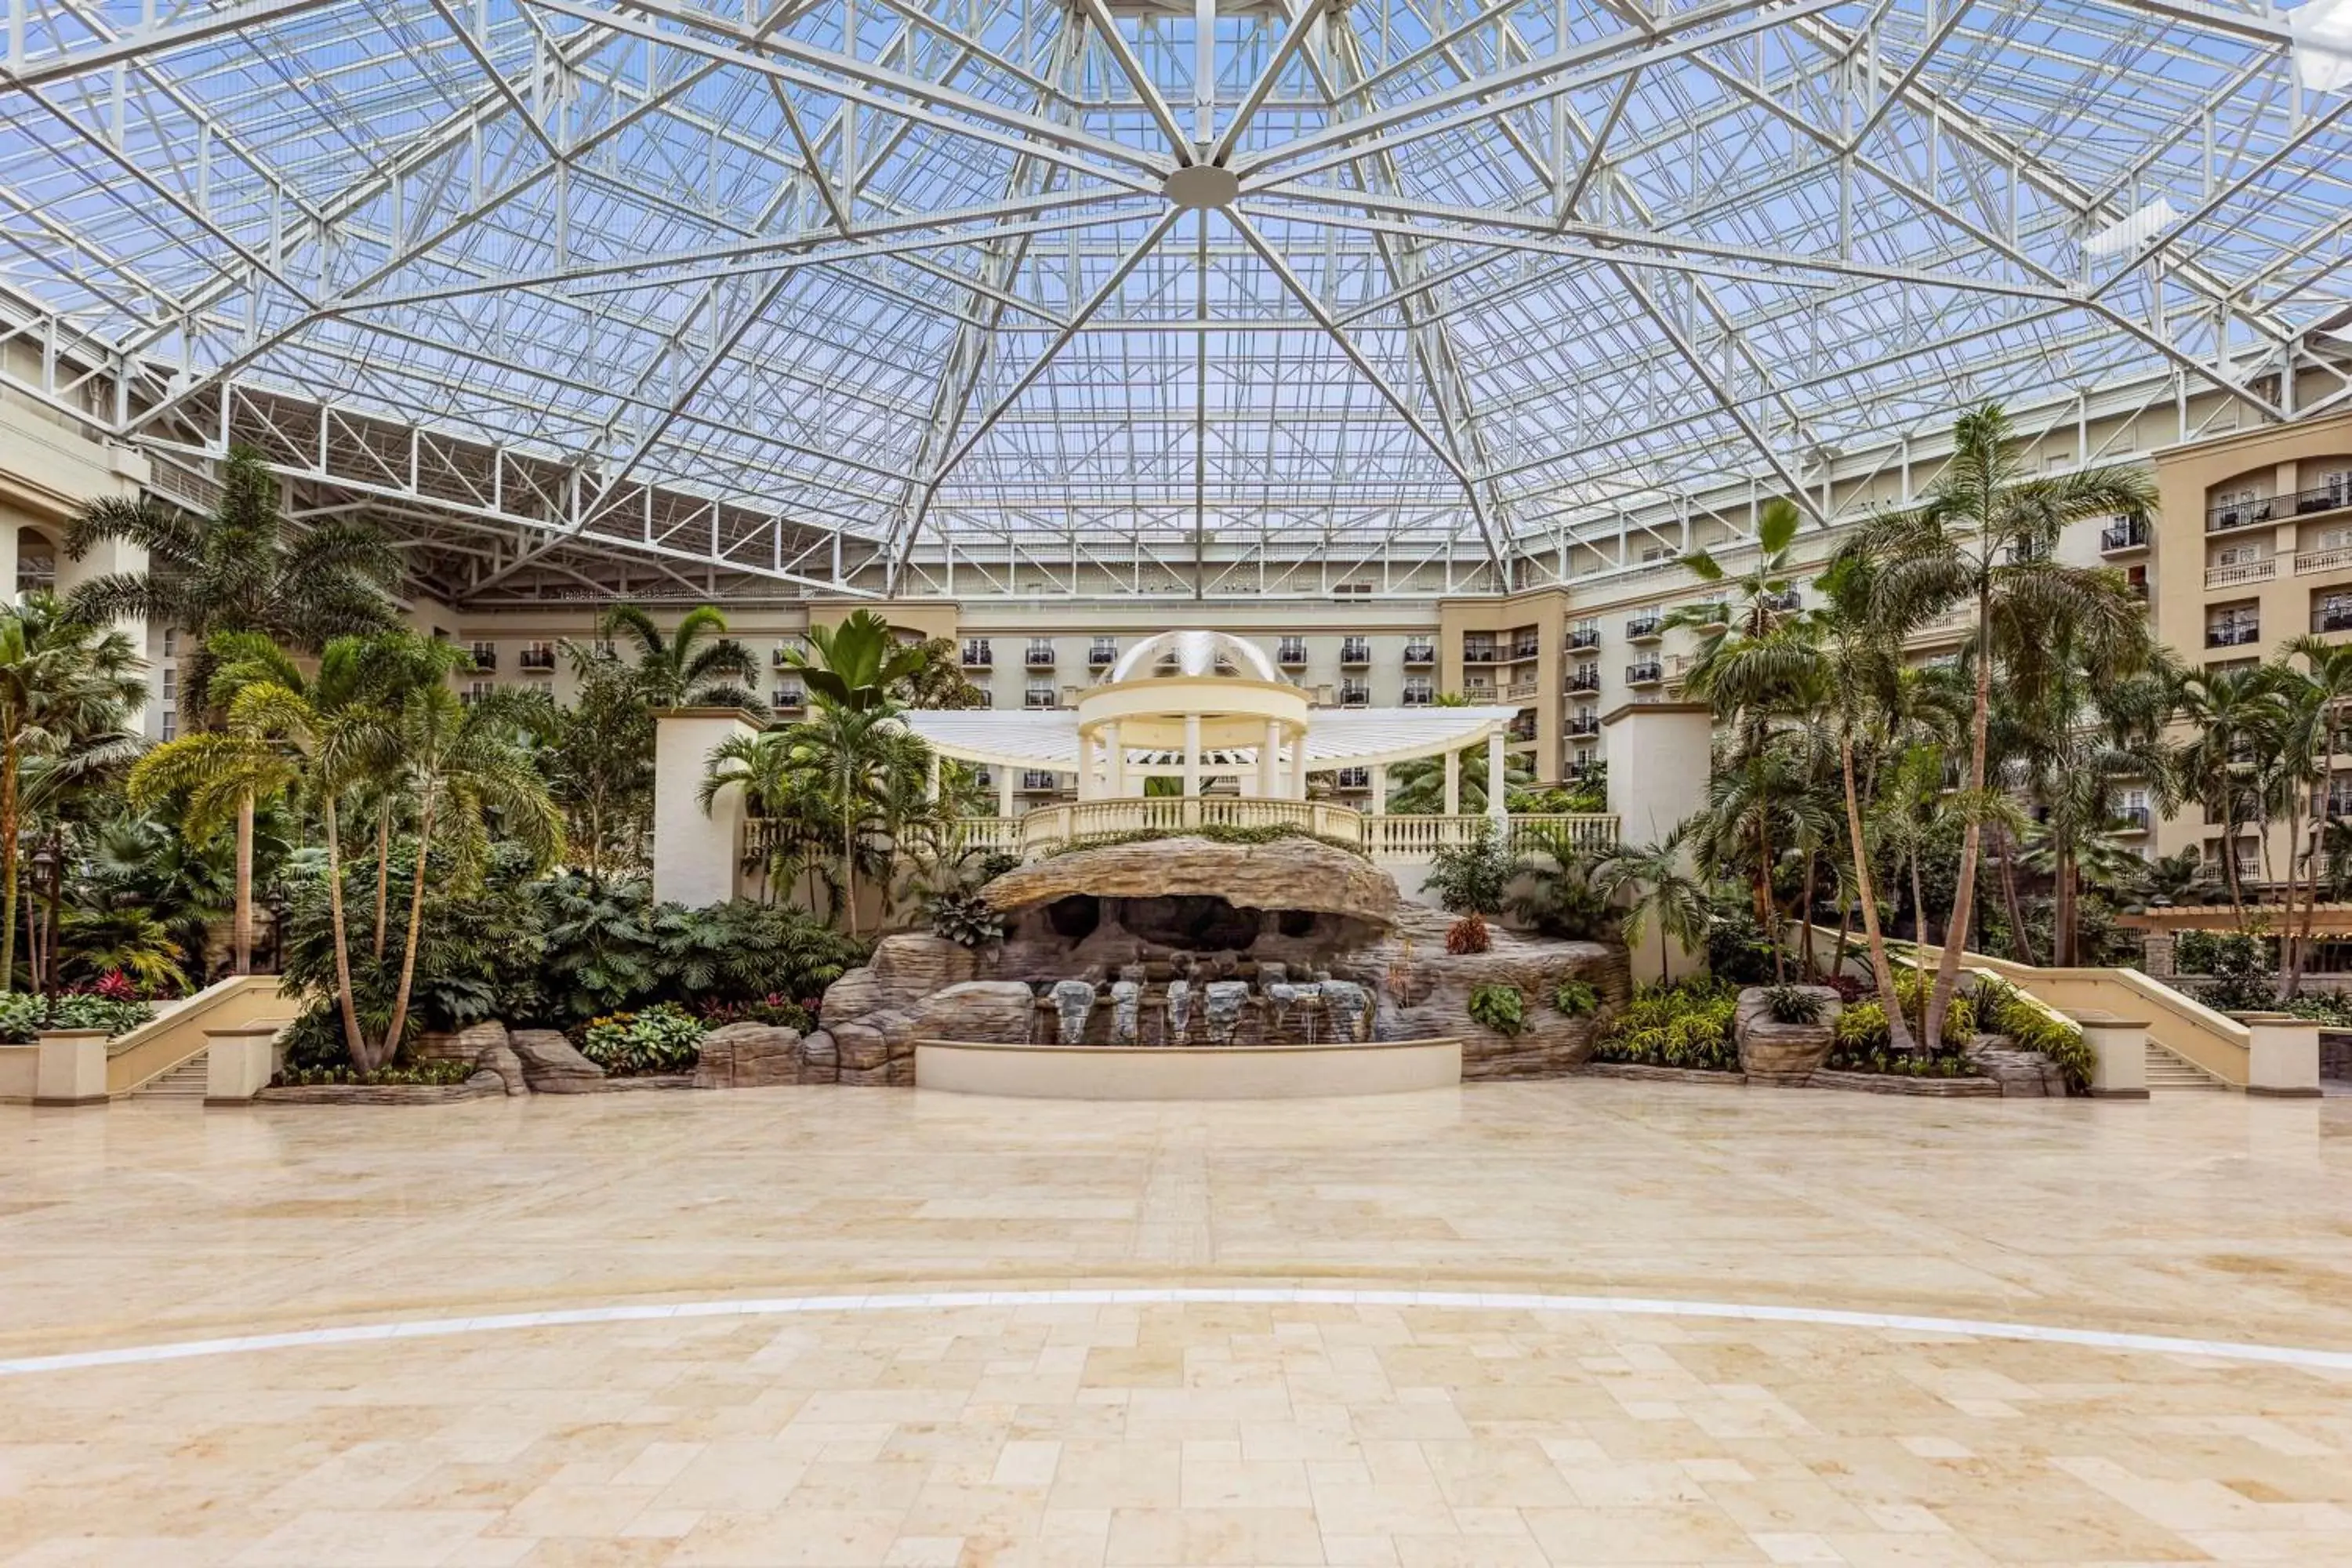 Property building in Gaylord Palms Resort & Convention Center